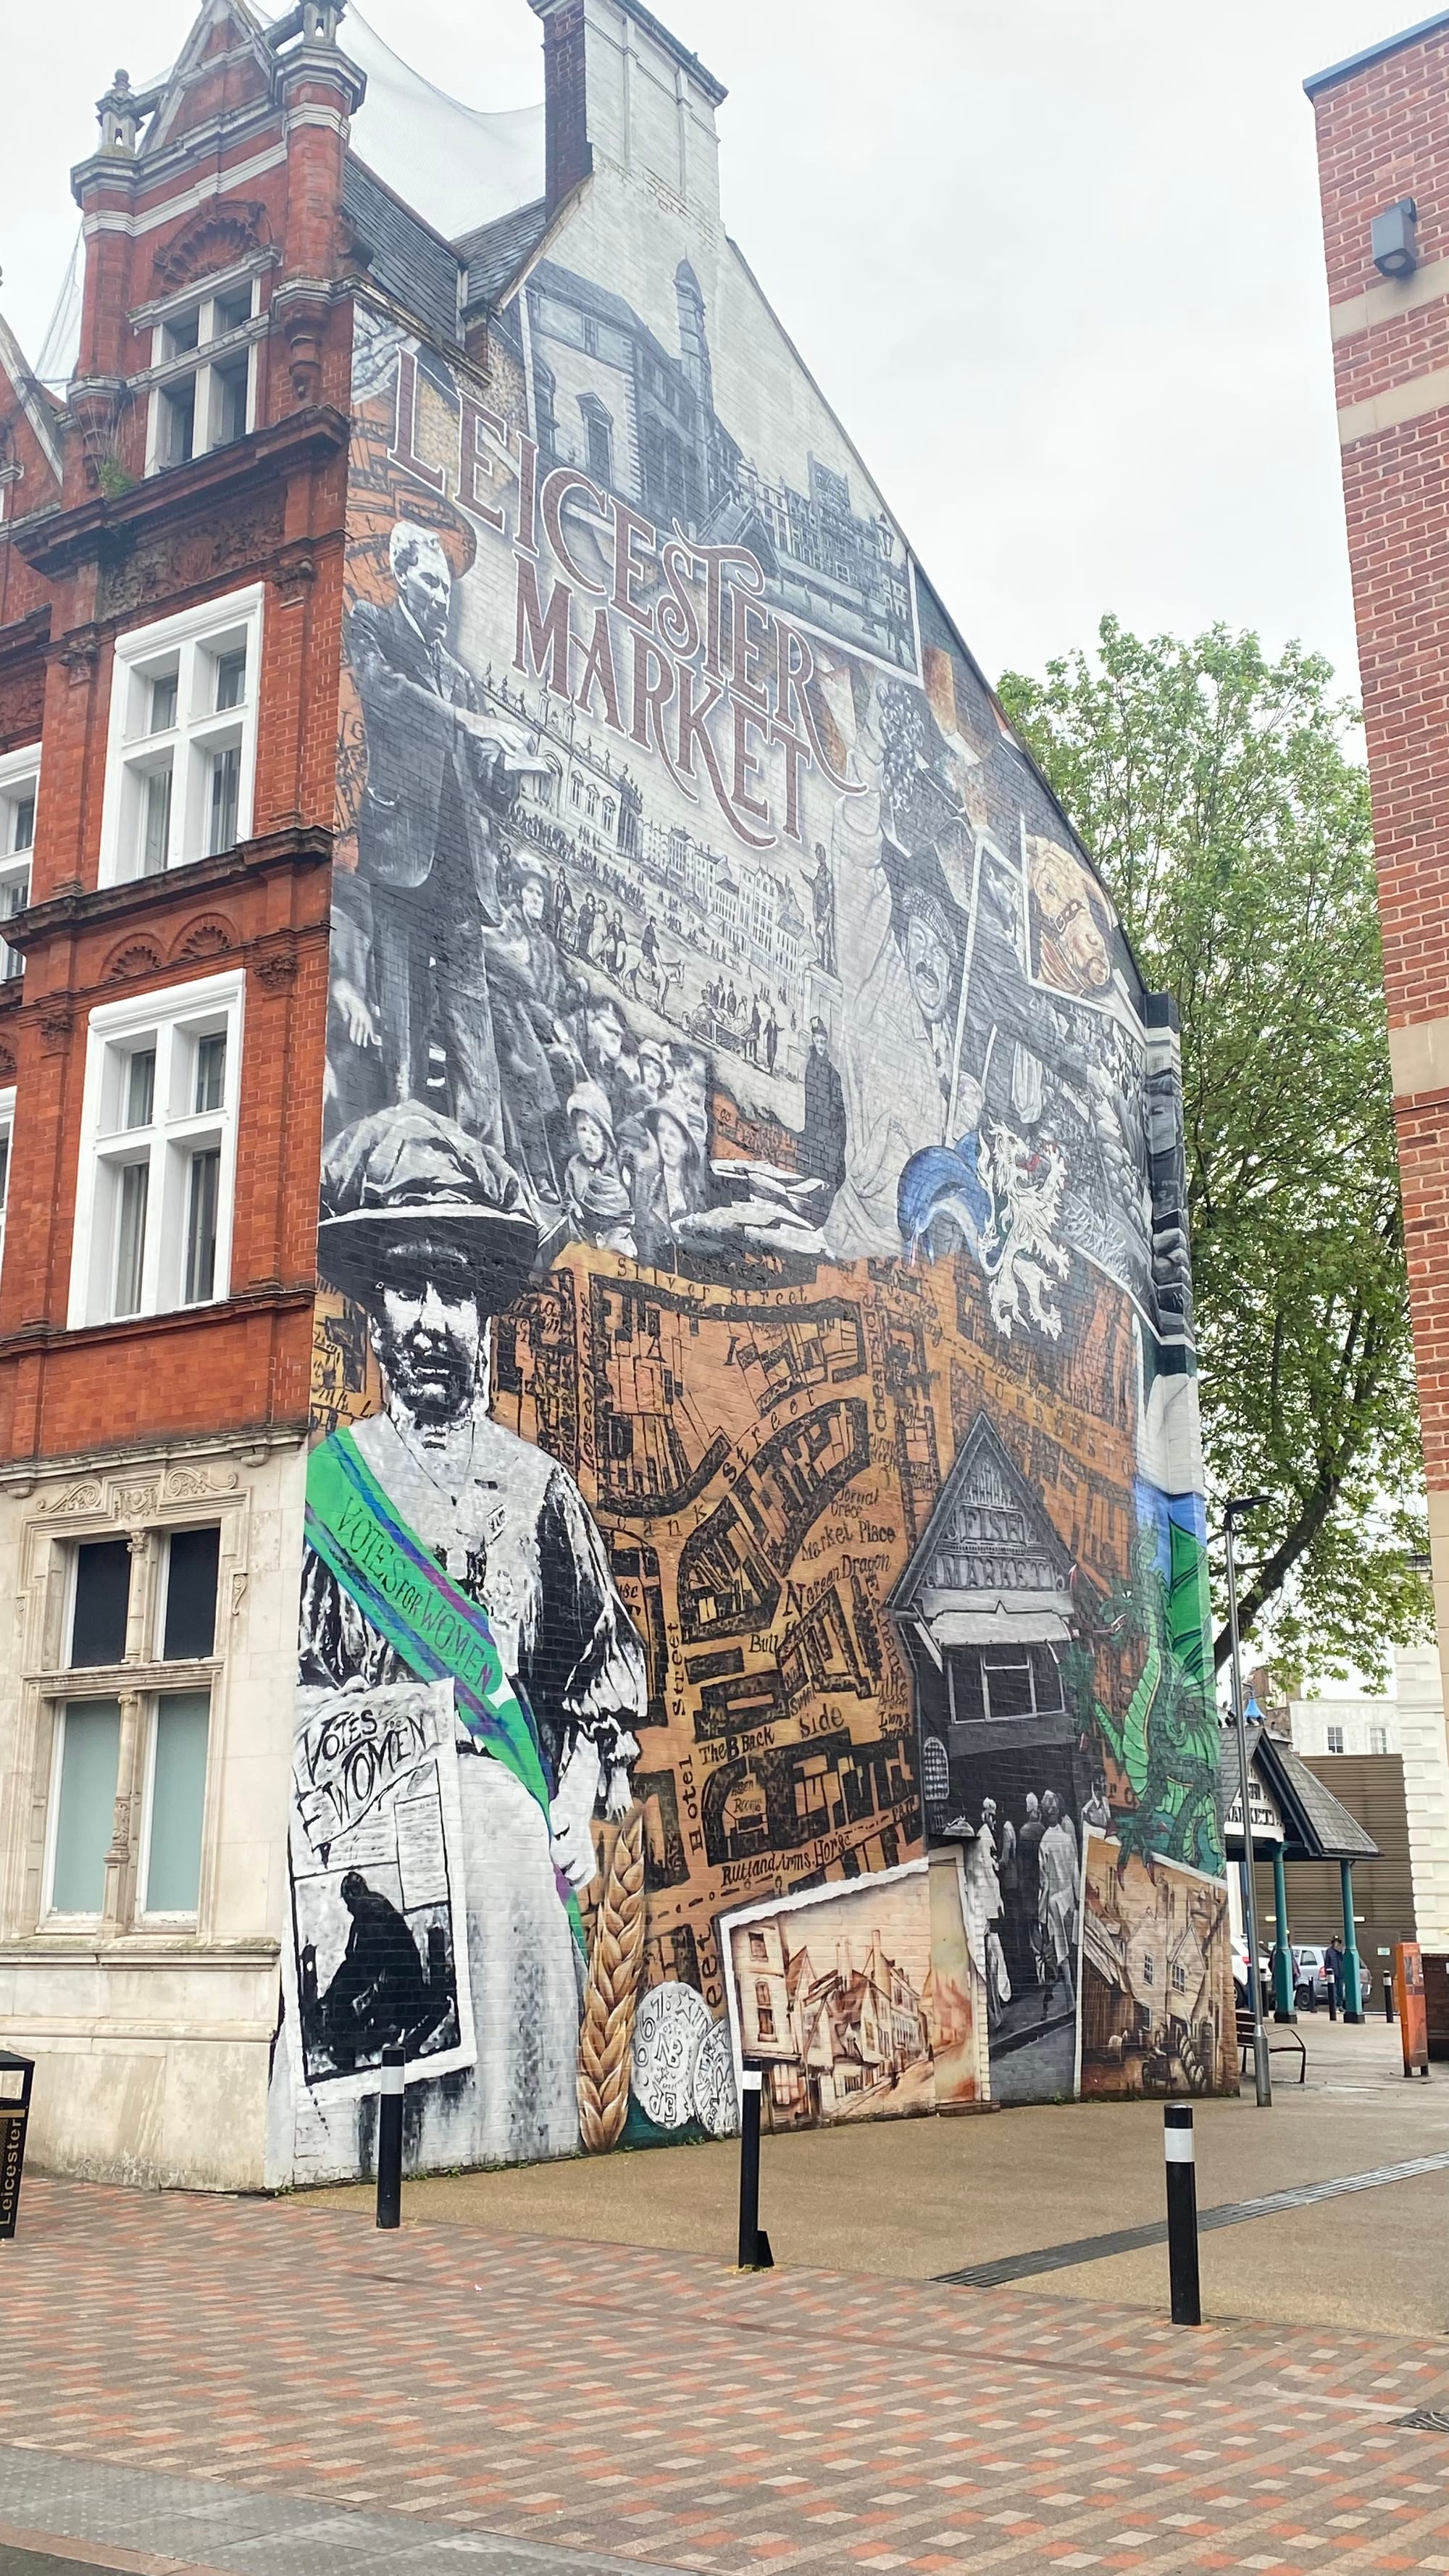 Mural celebrating Leicester market and suffragette Alice Hawkins.